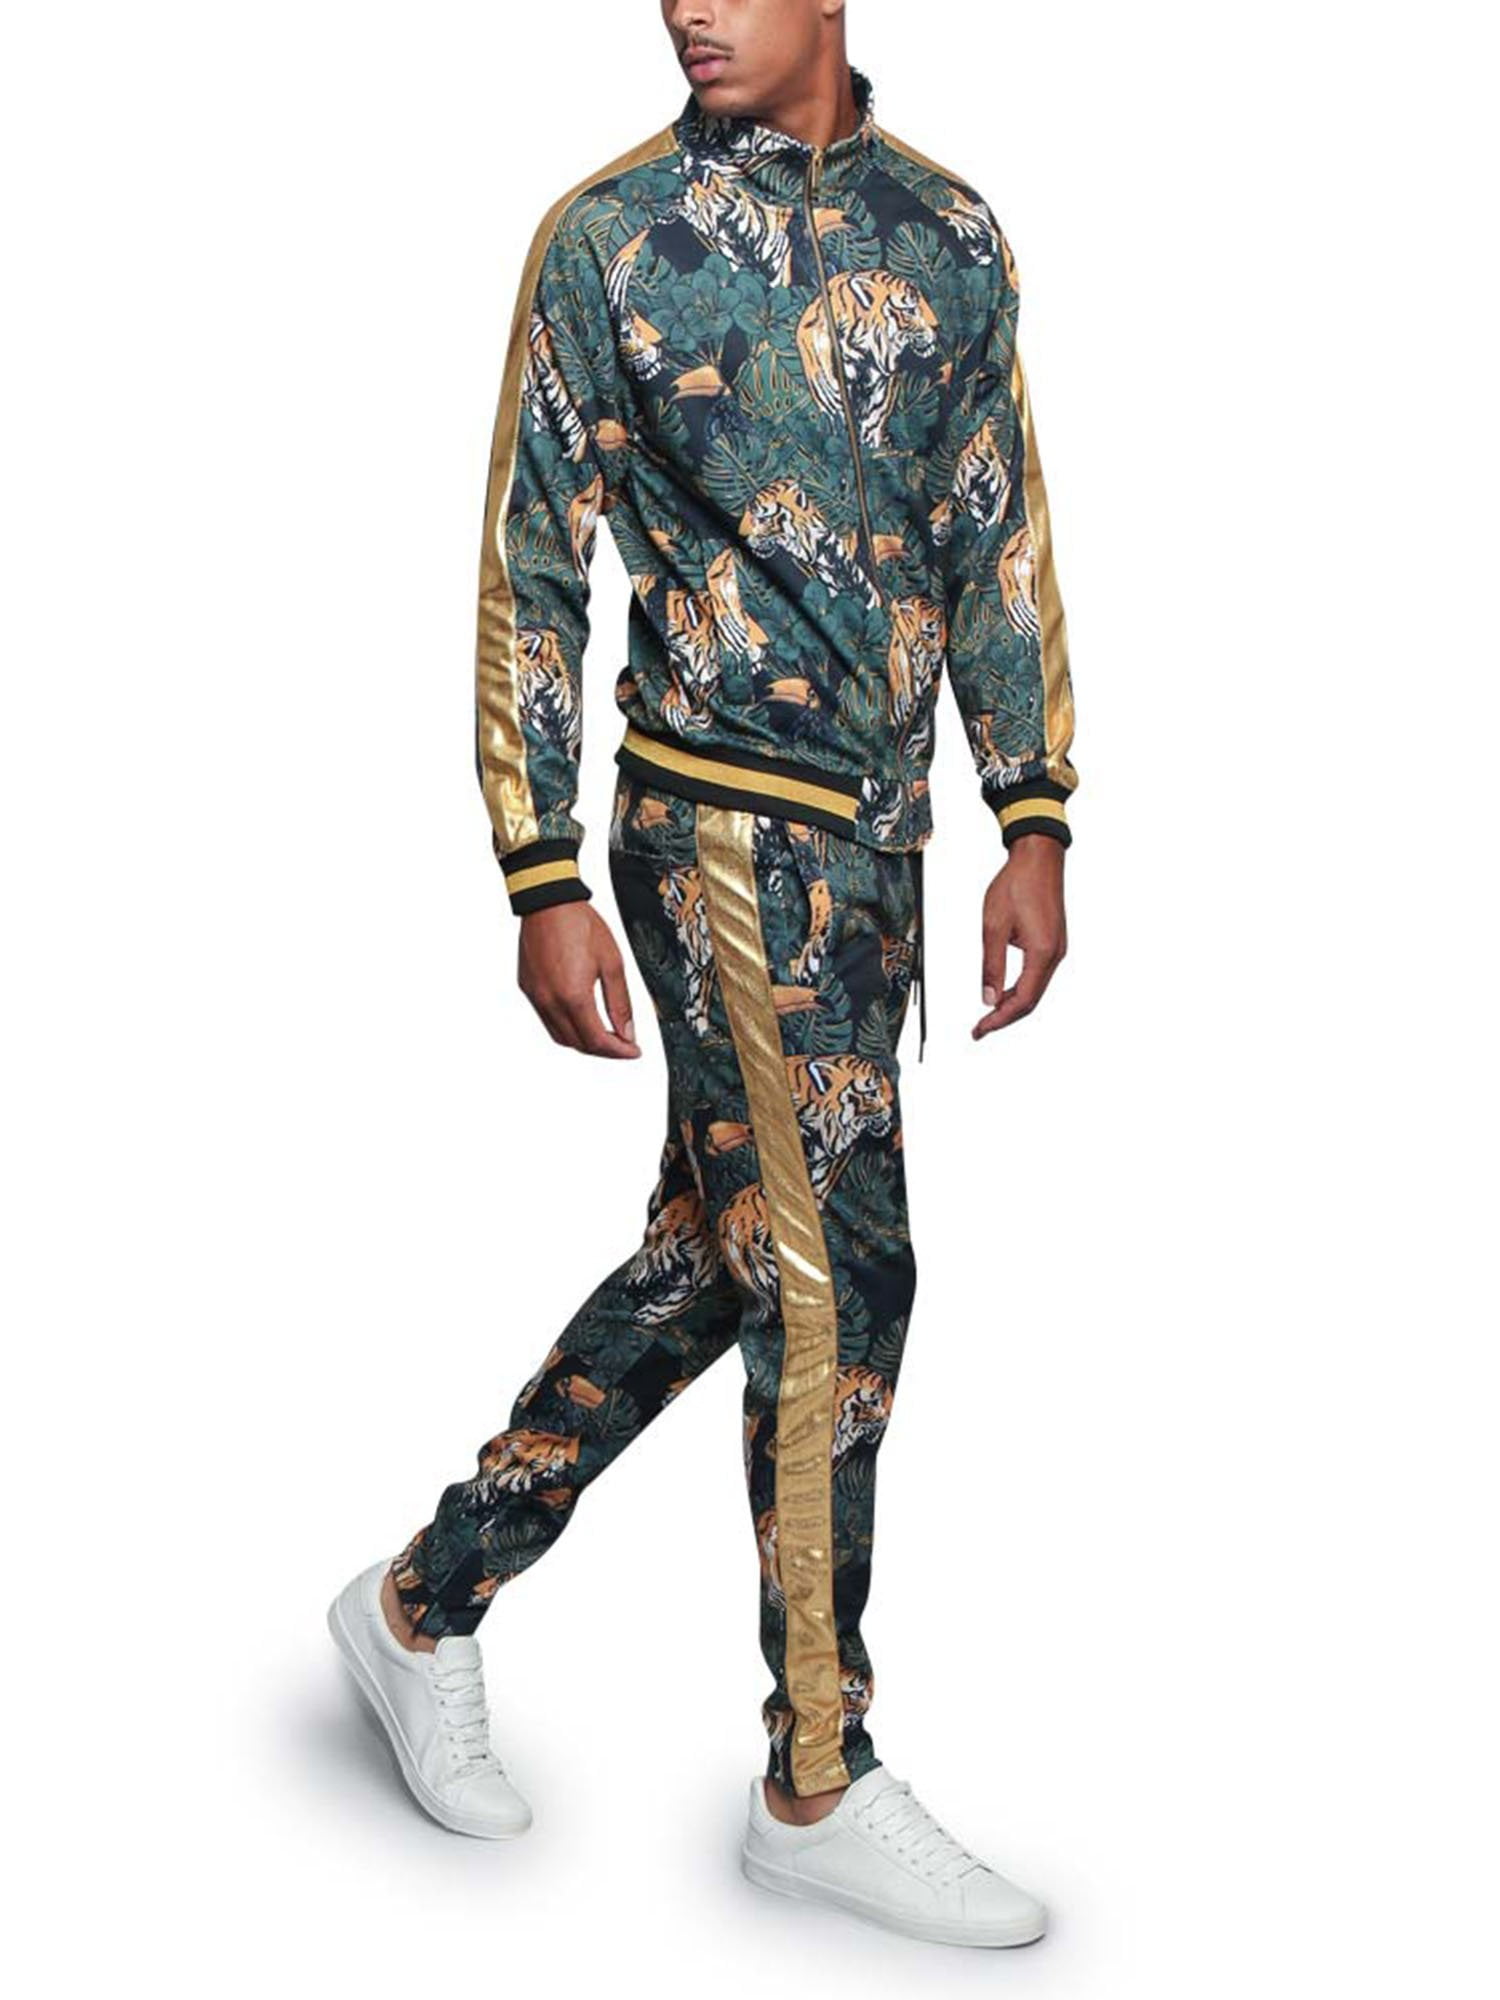 G-Style - Victorious Royal Floral Tiger Track Suit ST559 - Black - 2X ...